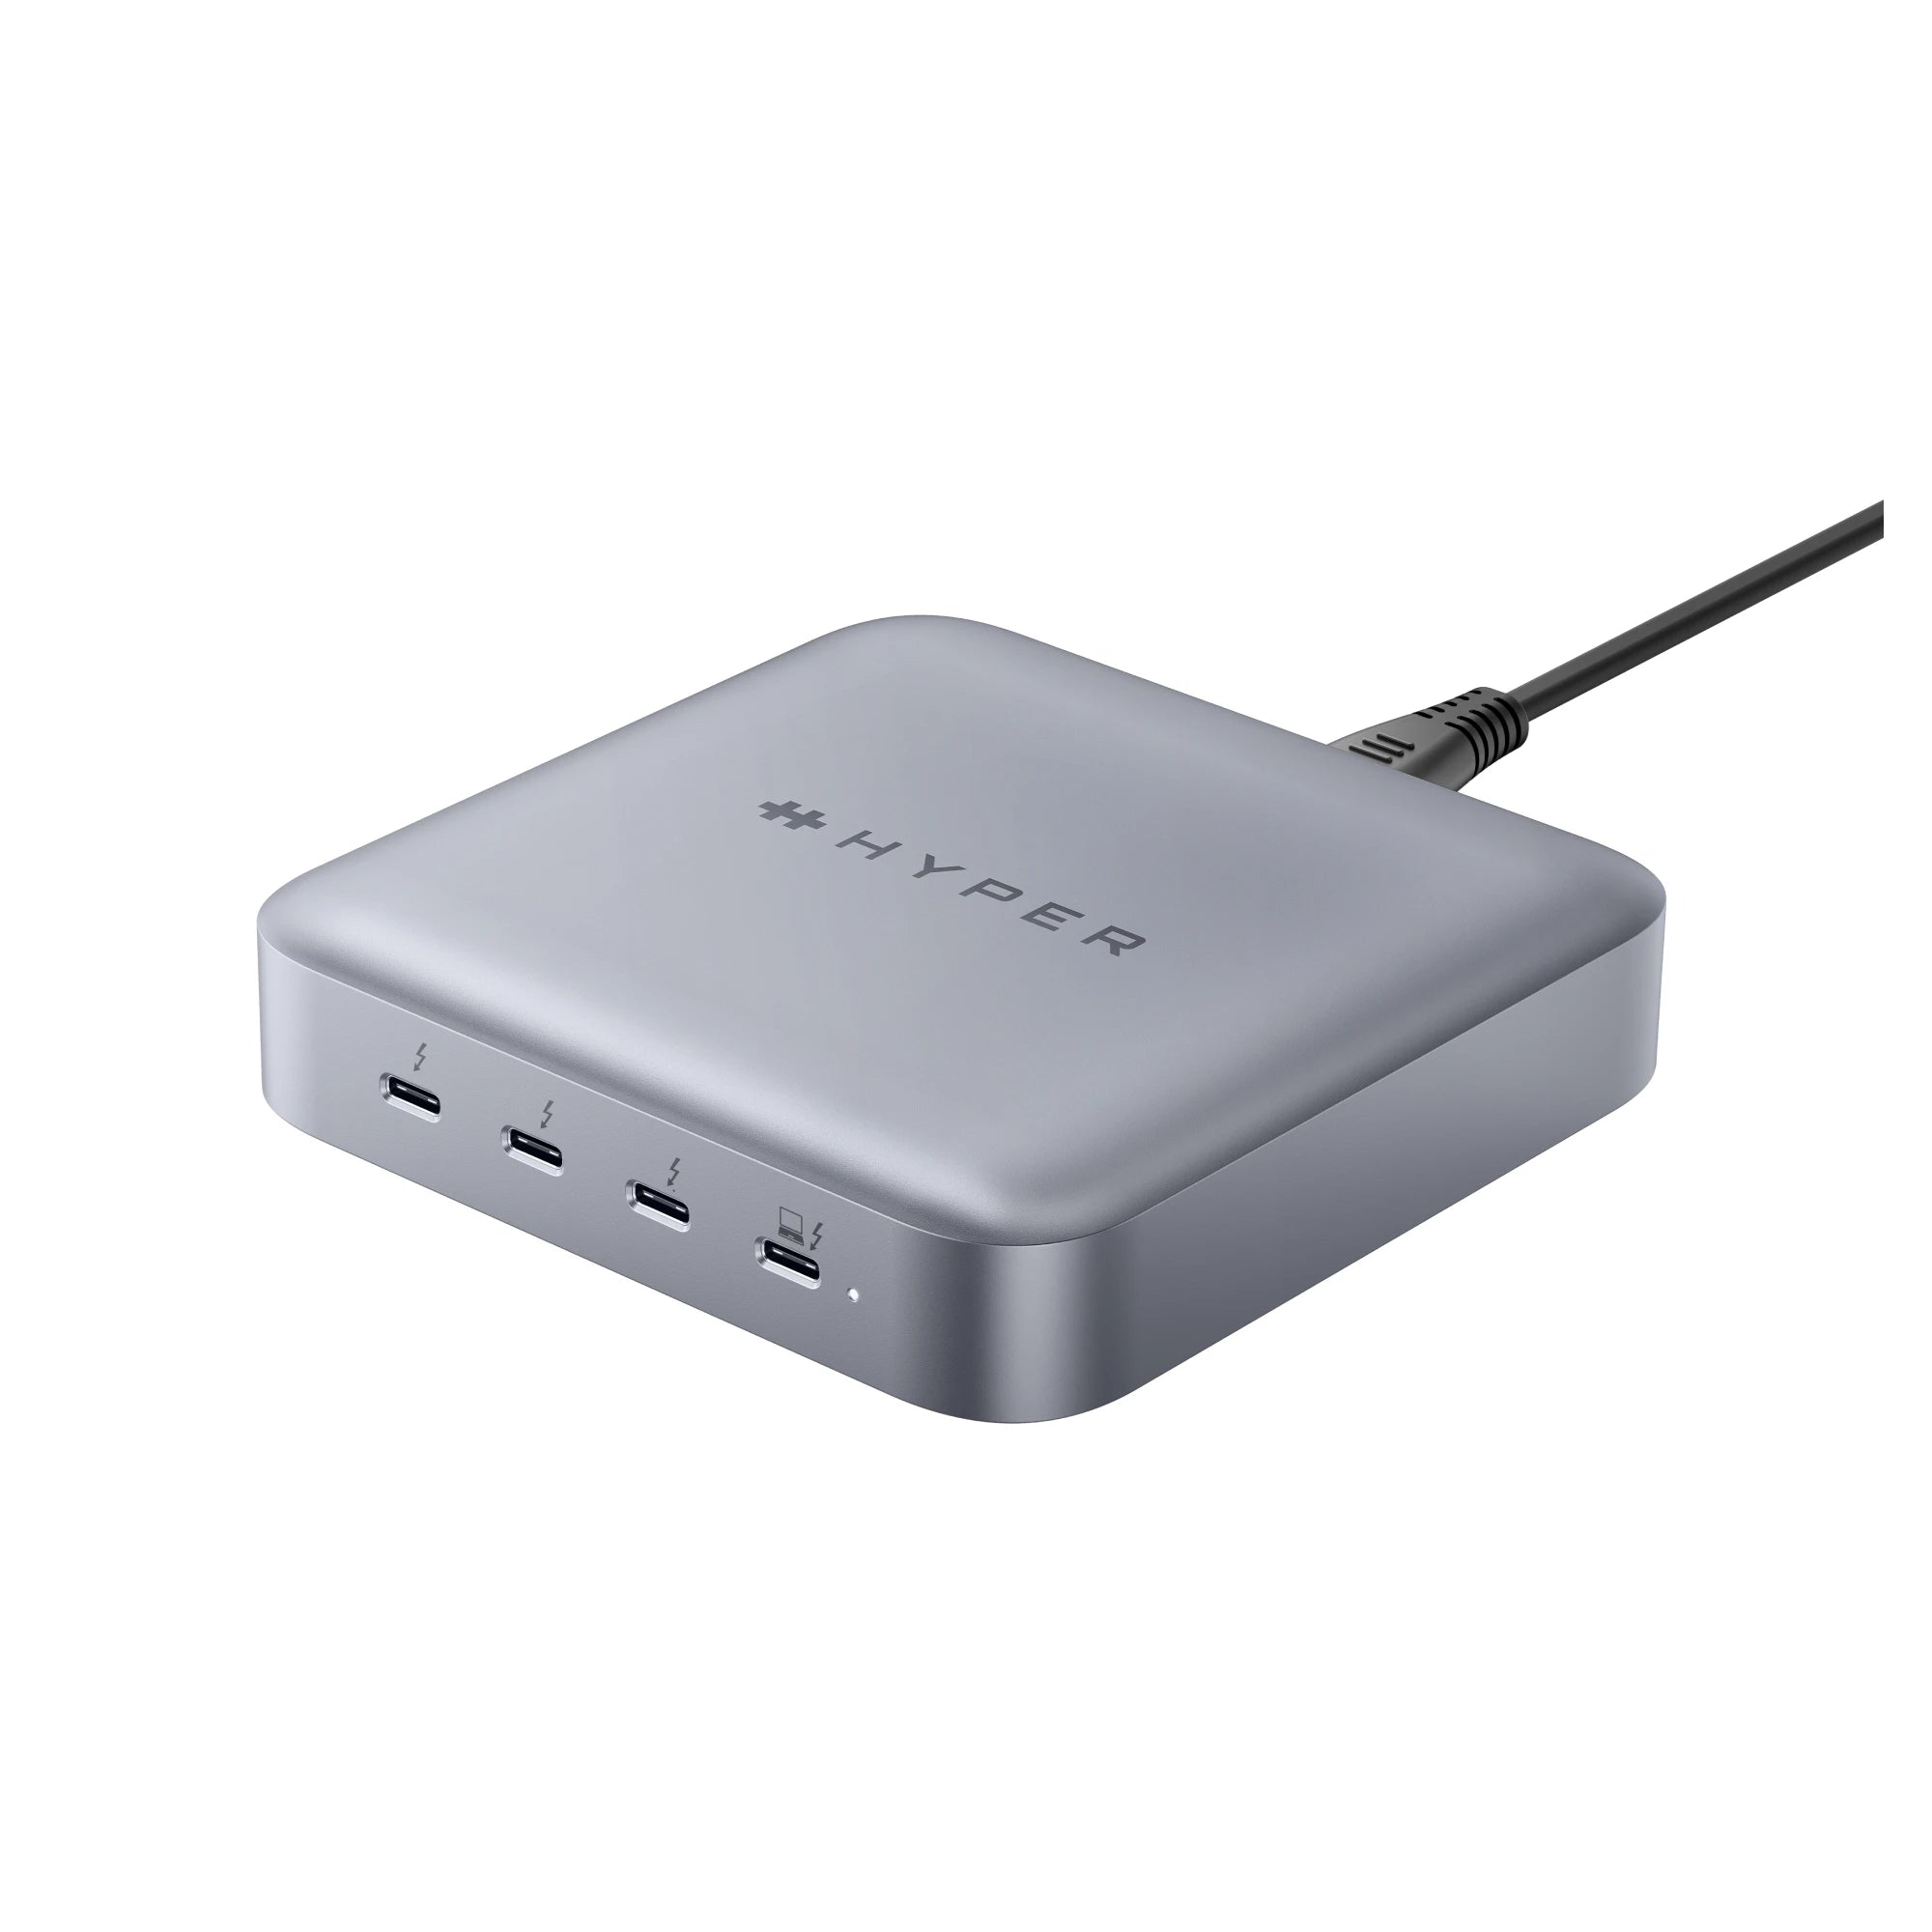 HyperDrive Thunderbolt 4 Power Hub with Integrated GaN Power Source –